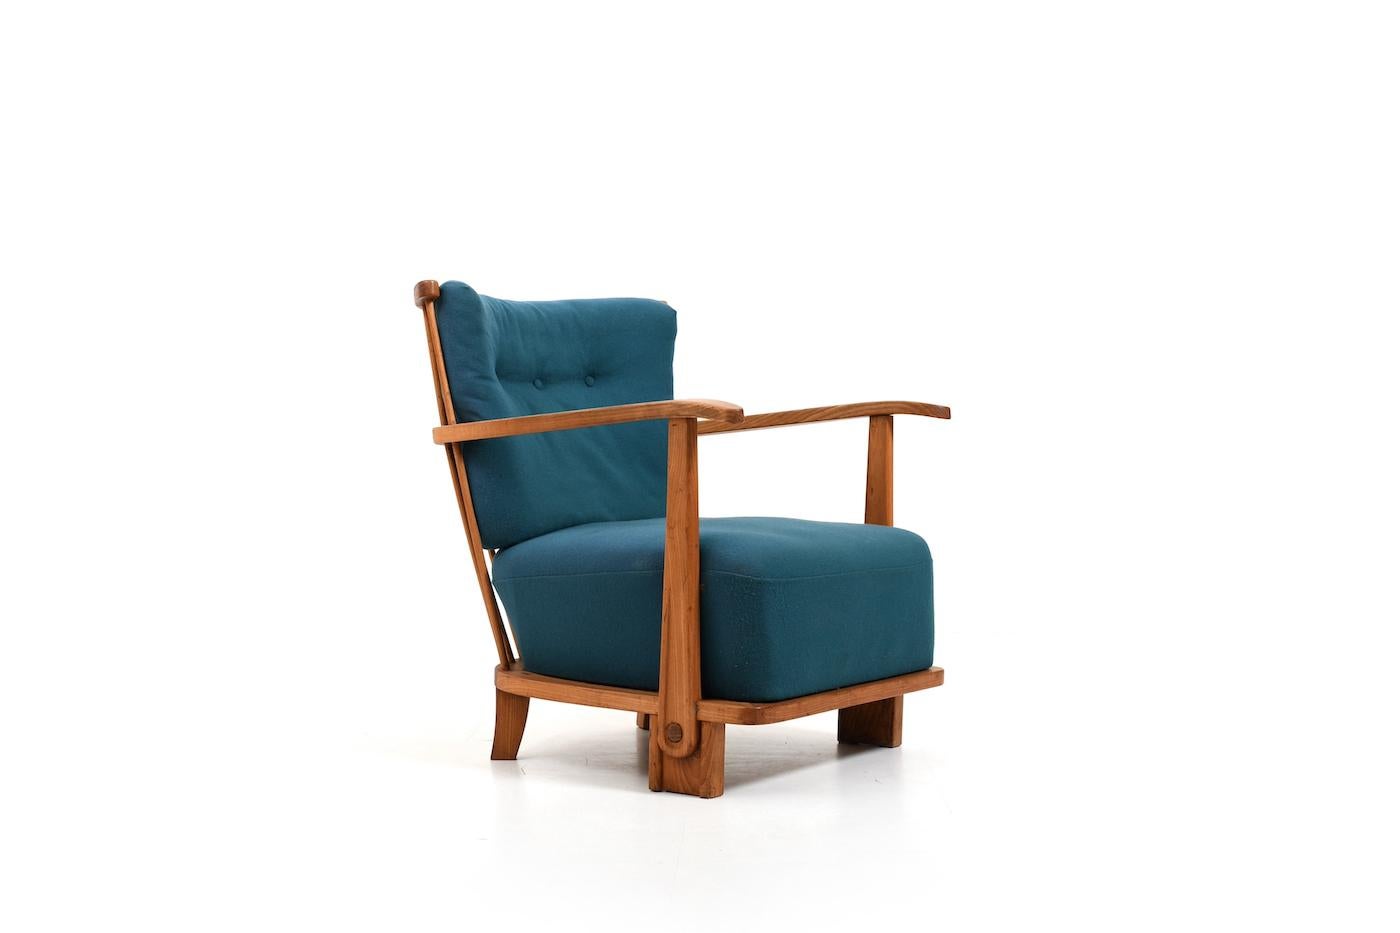 Old Fritz Hansen chair, model 1590 in elm wood oak and upholstered in petrol fabric. Produced in Denmark, early 1940s. In good old condition with patina.